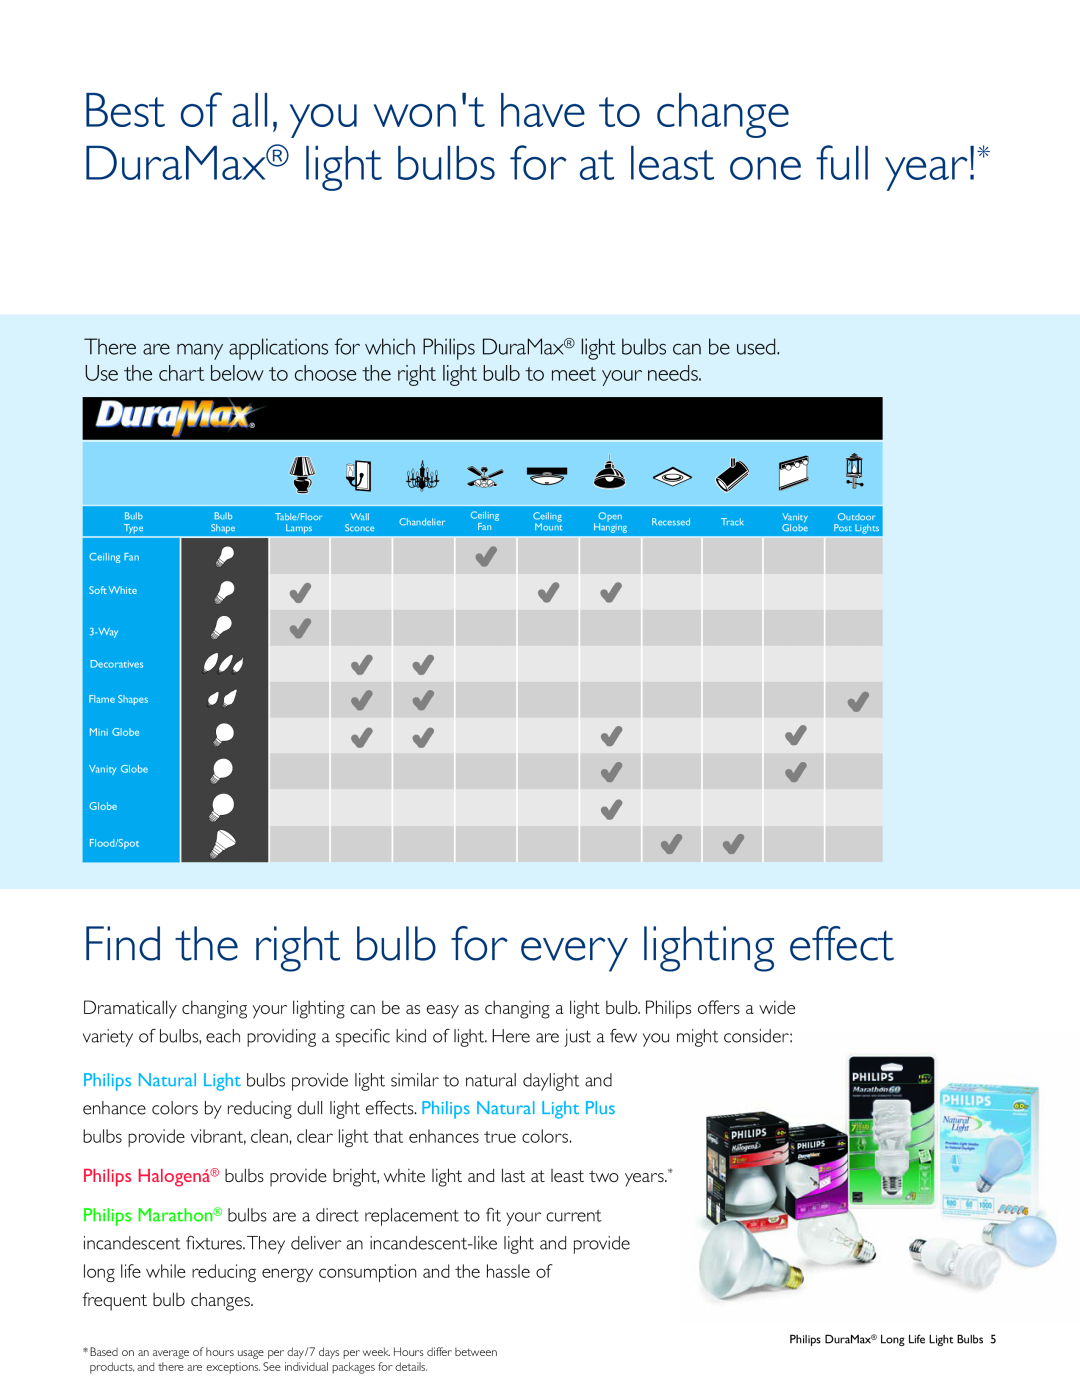 Philips manual Find the right bulb for every lighting effect, Philips DuraMax Long Life Light Bulbs 